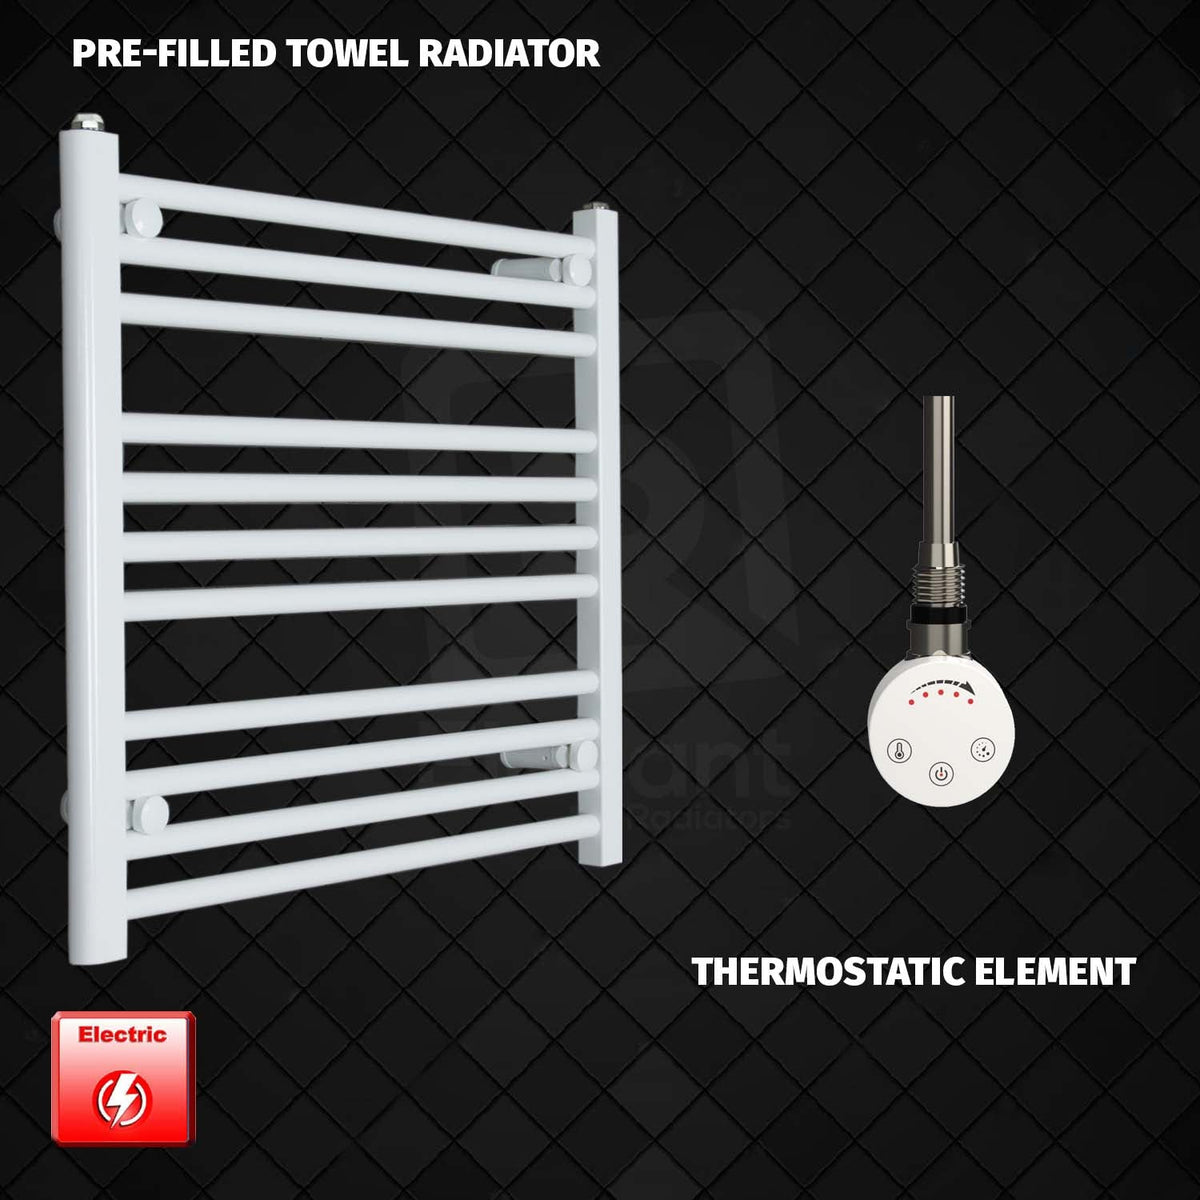 600 mm High 700 mm Wide Pre-Filled Electric Heated Towel Rail Radiator White HTR SMR Thermostatic Element No Timer